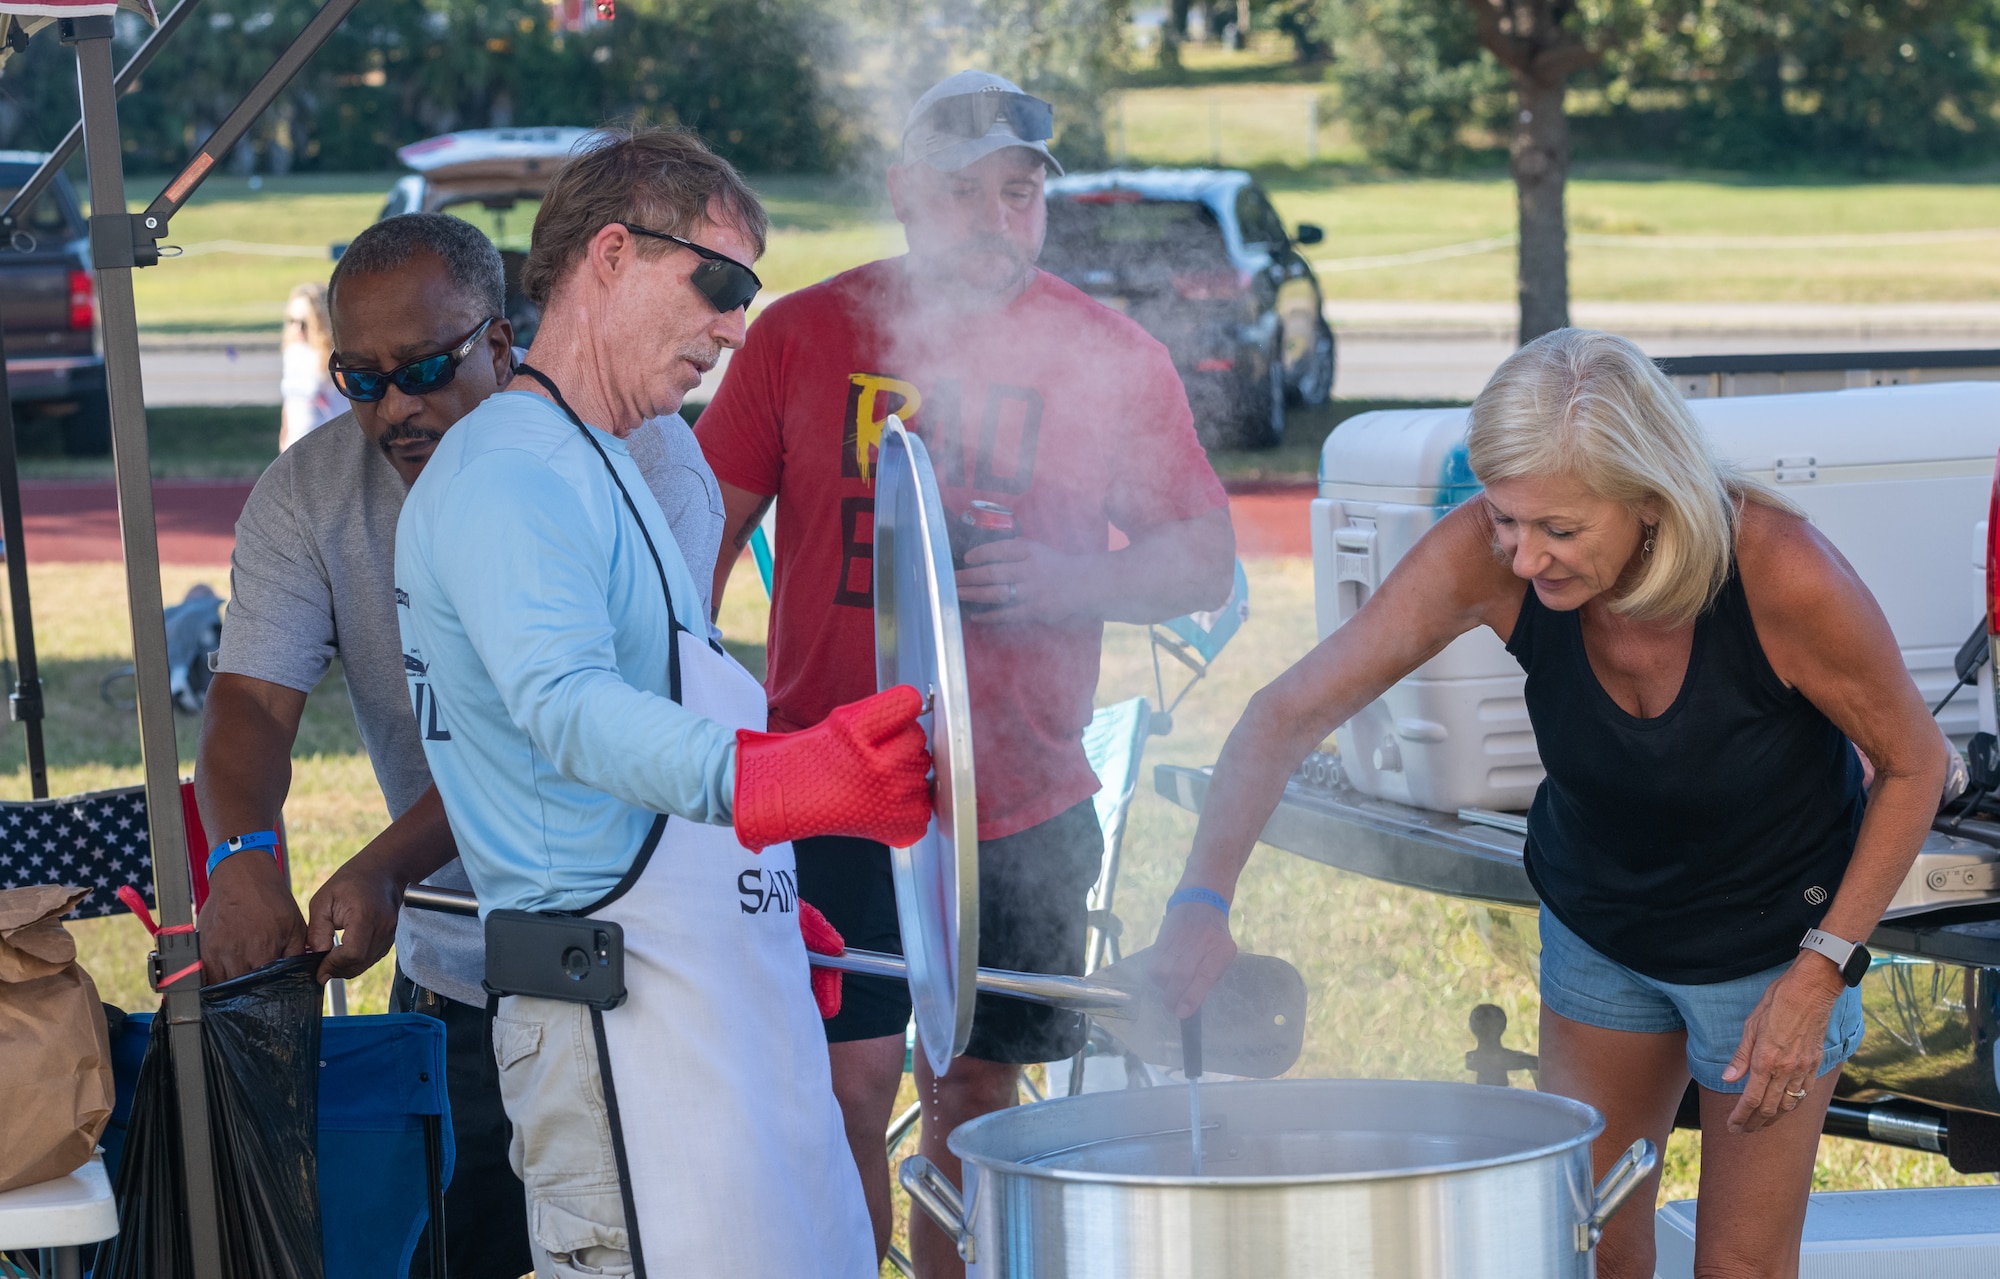 Members of the "Juicy Tales" team stir their pot of boiled shrimp during the Tails 'N Ales Annual Shrimp Cook-off outside the Bay Breeze Event Center at Keesler Air Force Base, Mississippi, Oct. 14, 2022. The 81st Force Support Squadron hosted event offered a variety of craft beers for tasting and many teams fighting for the ultimate best shrimp recipe. (U.S. Air Force photo by Andre' Askew)